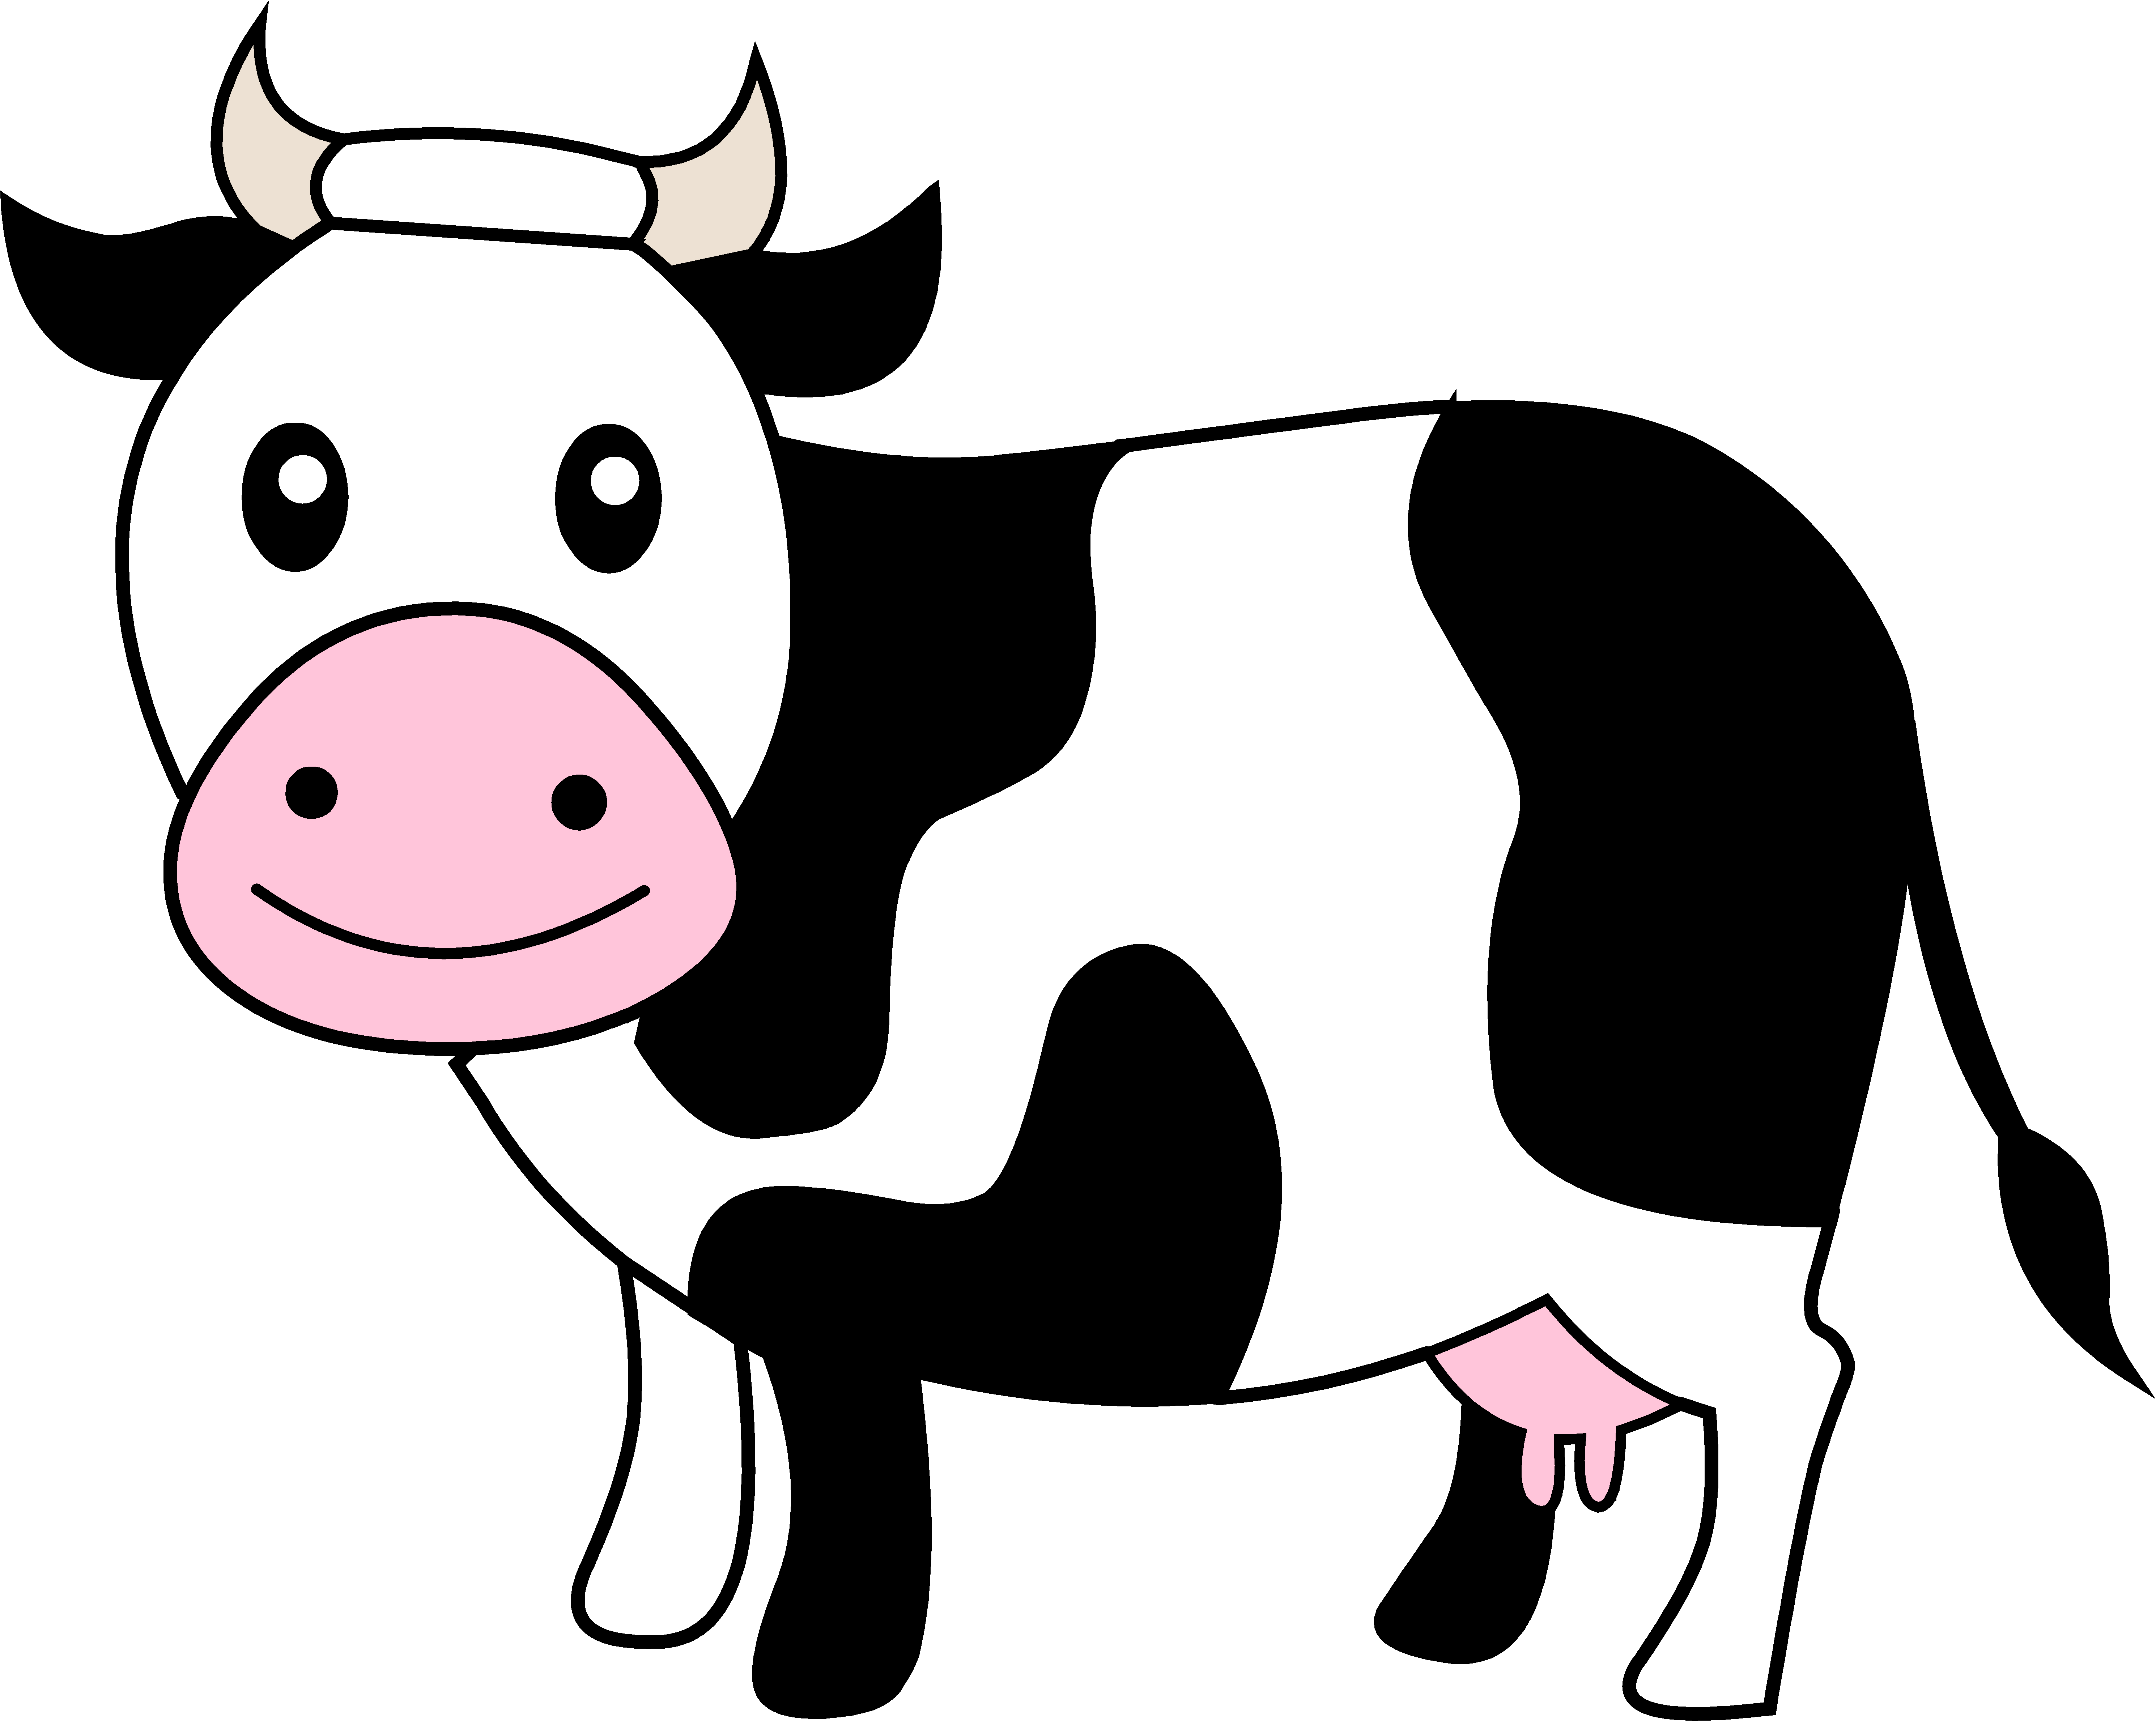 Clipart kitchen producer. Cow clip art embroidery